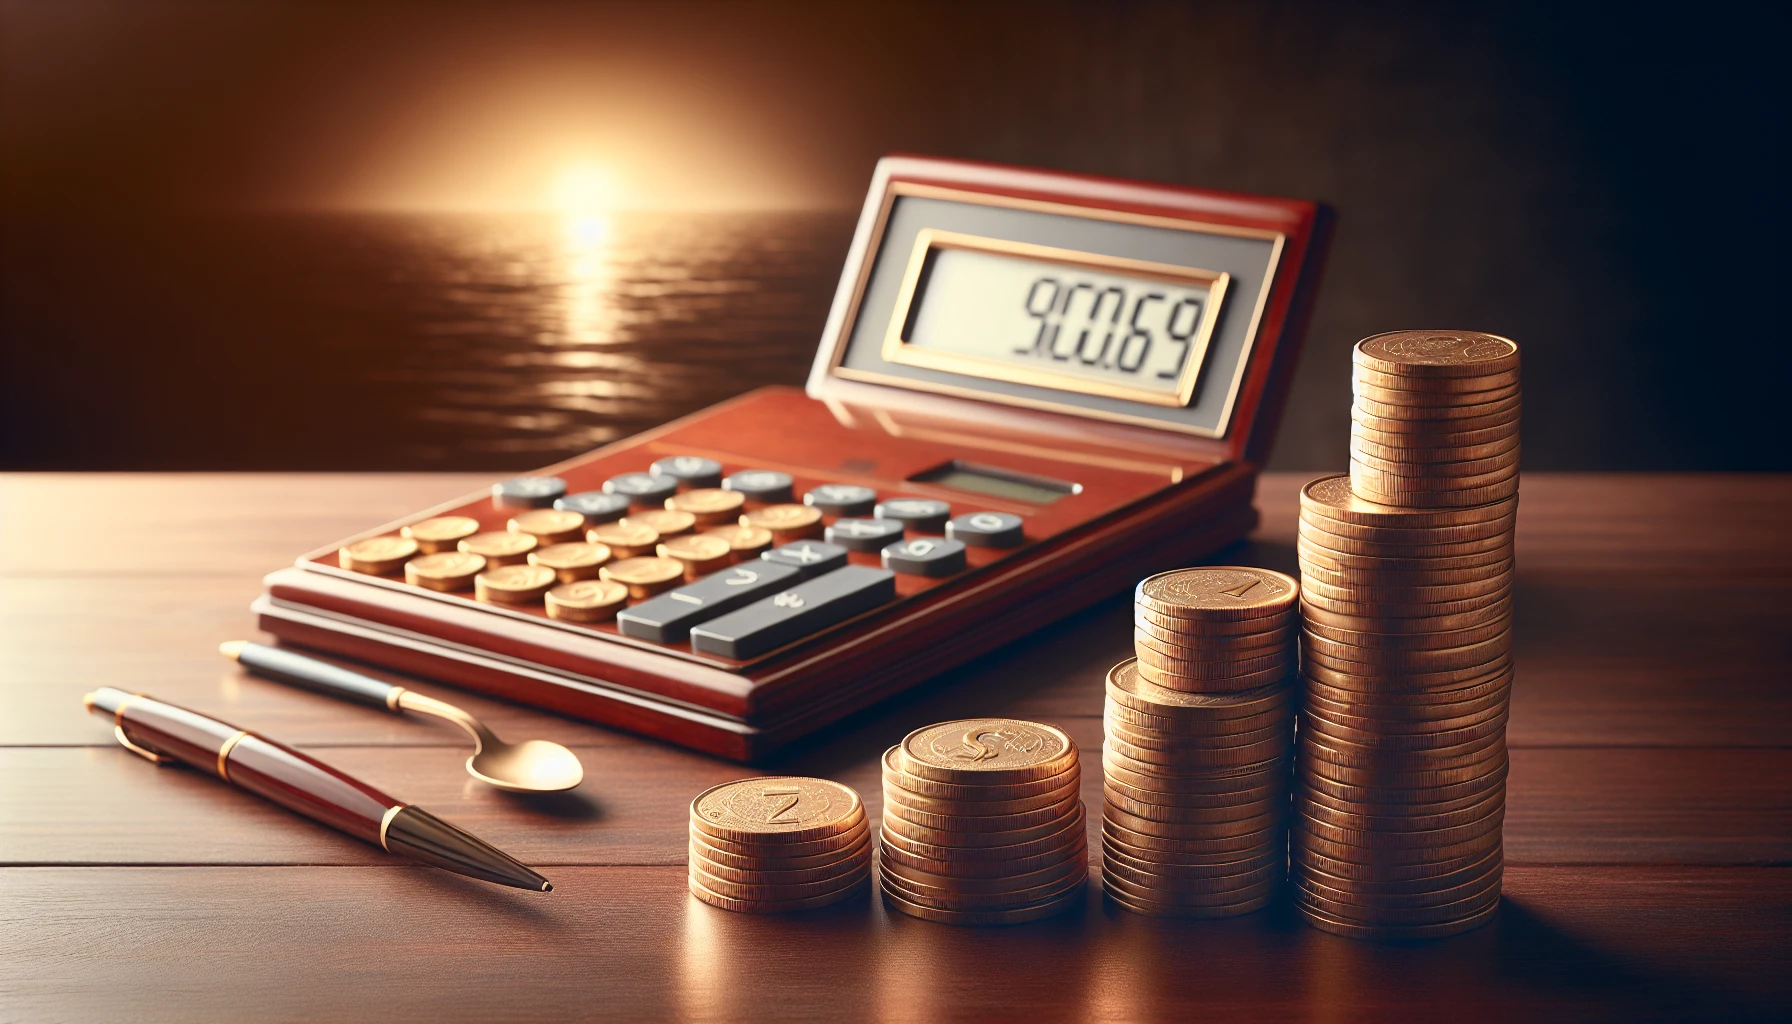 Retirement planning concept with coins and a calculator